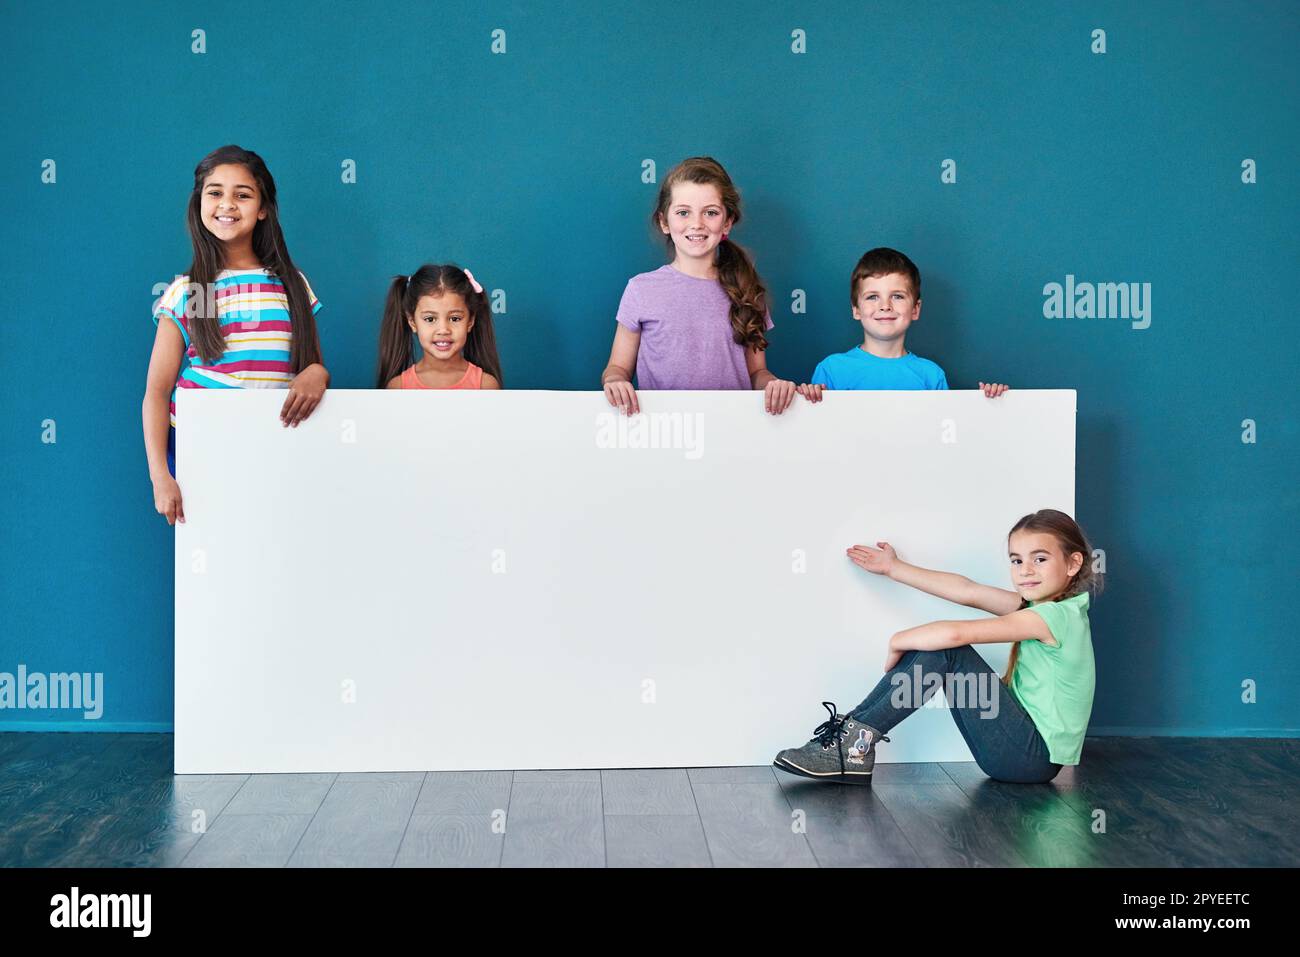 An important message brought to you by the kids. Studio portrait of a diverse group of kids standing behind a large blank banner against a blue background. Stock Photo